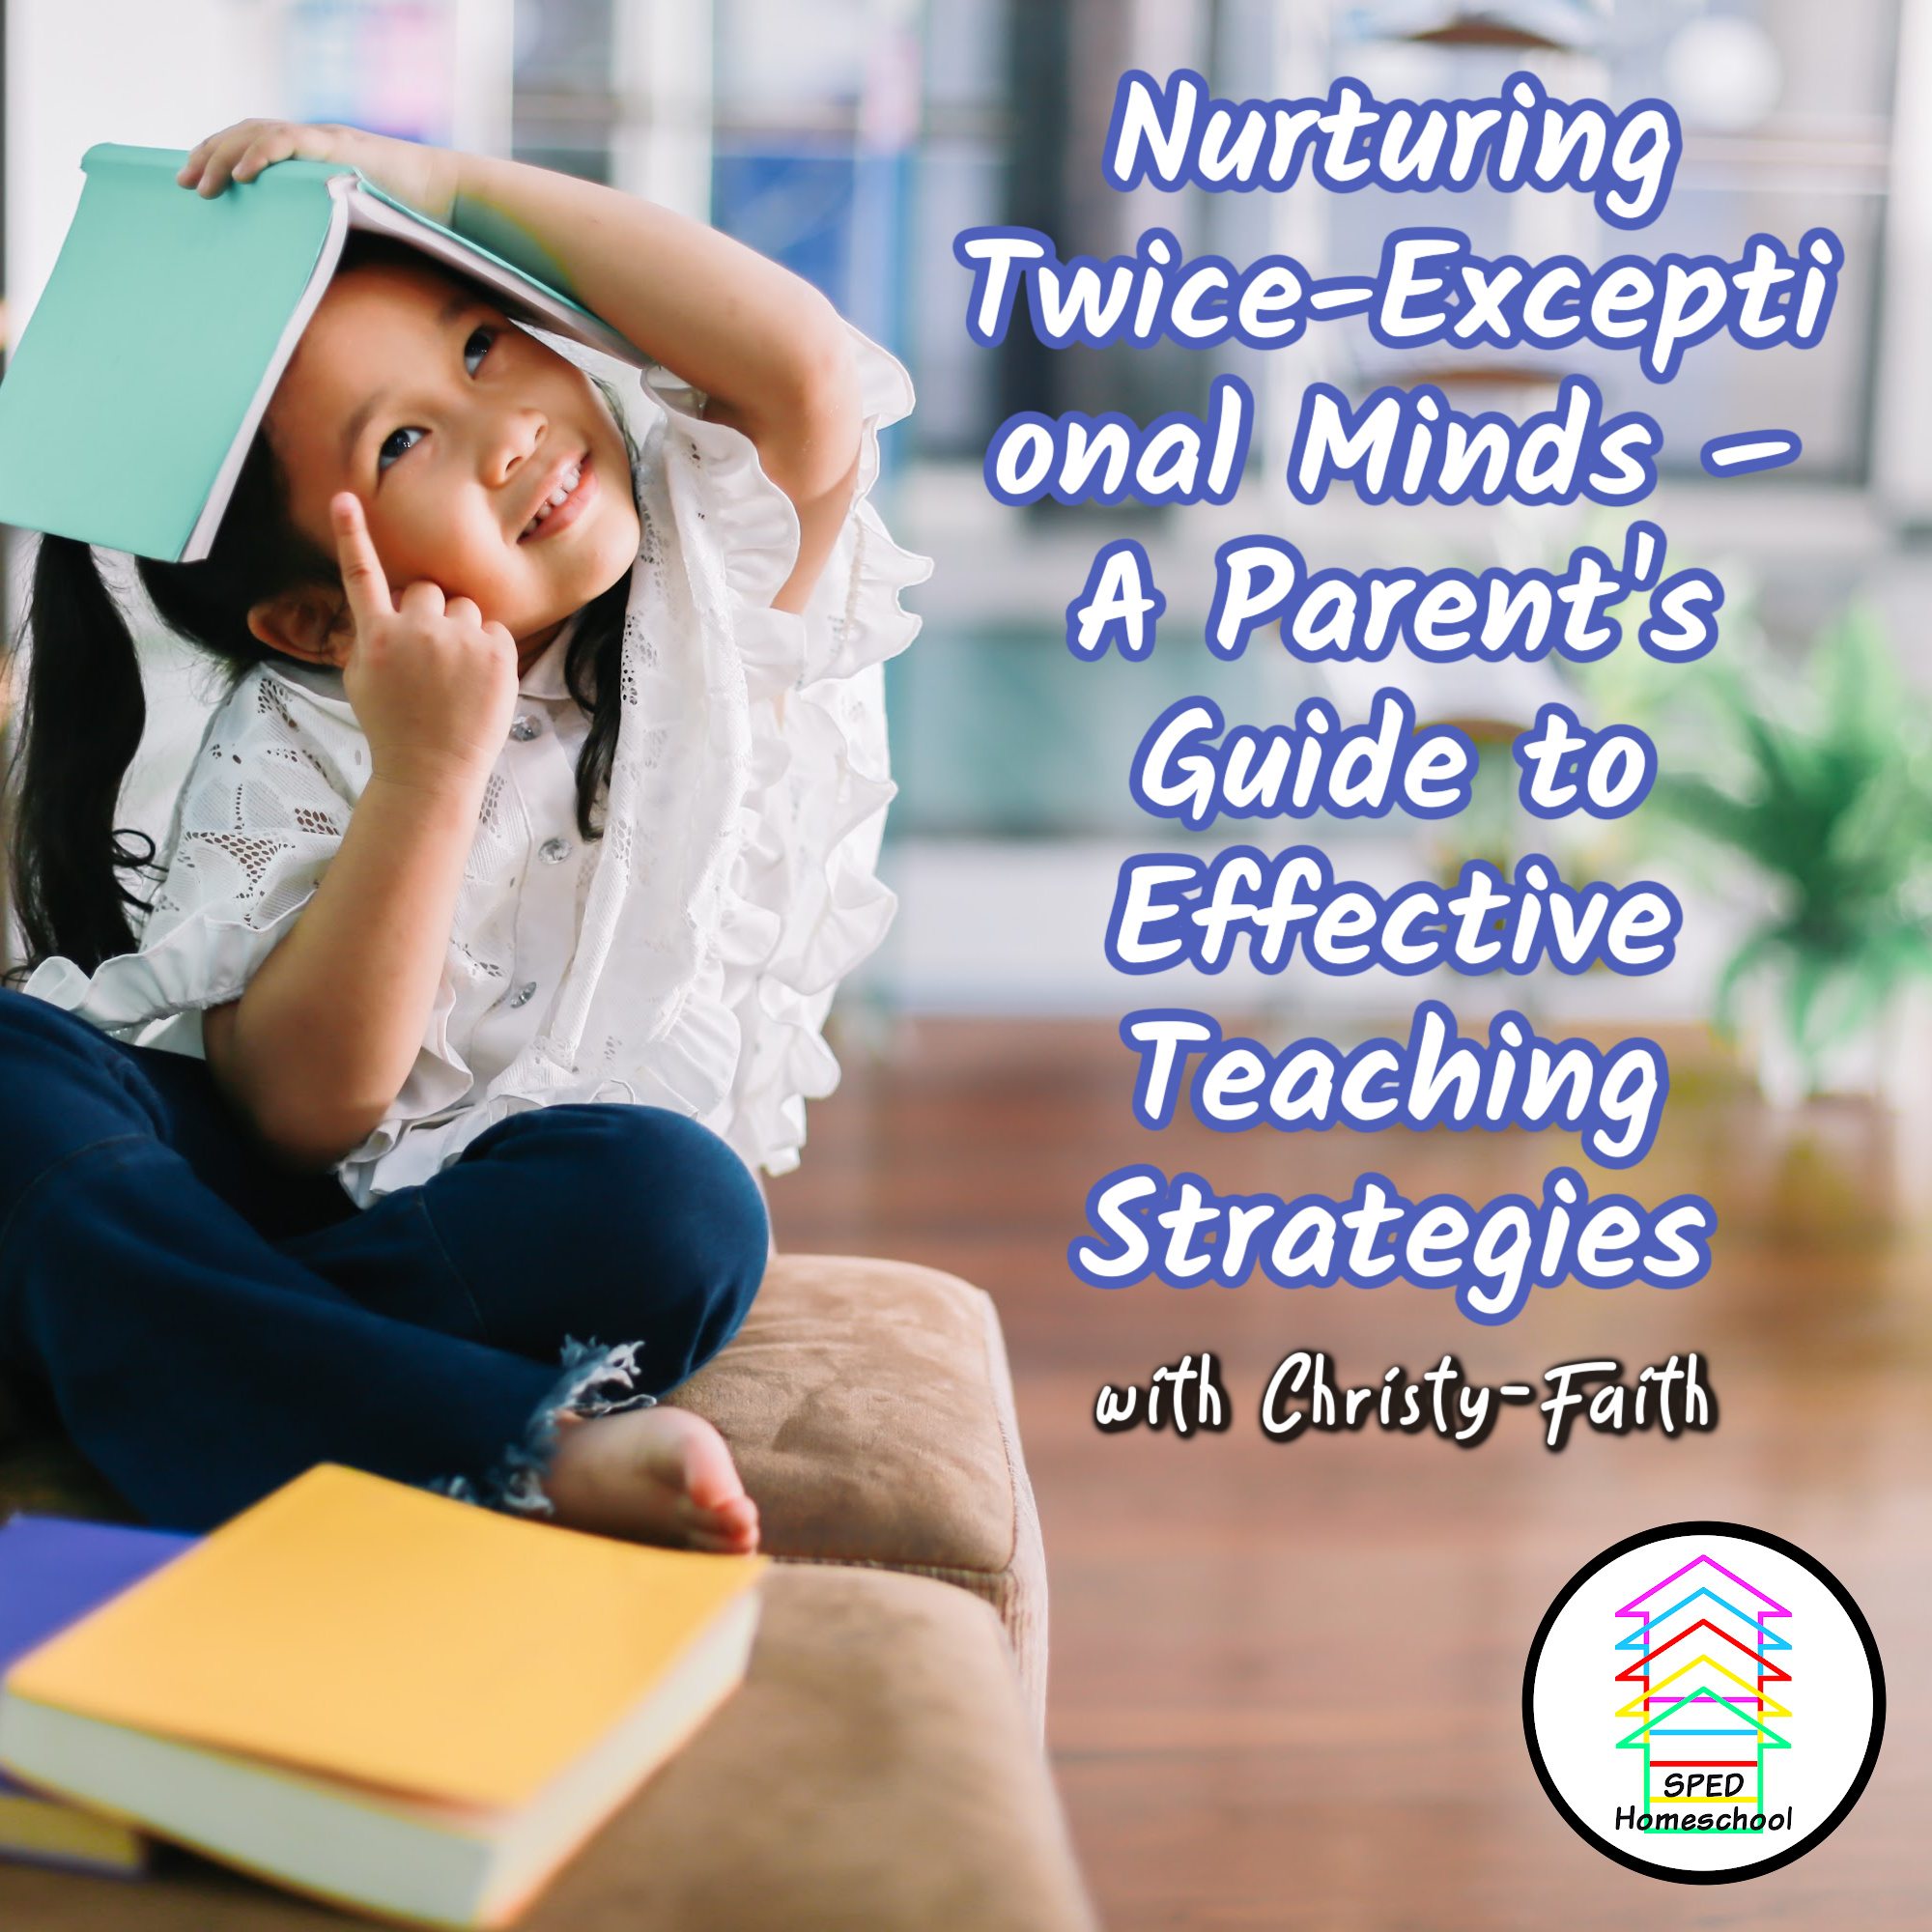 Nurturing Twice-Exceptional Minds – A Parent's Guide to Effective Teaching Strategies